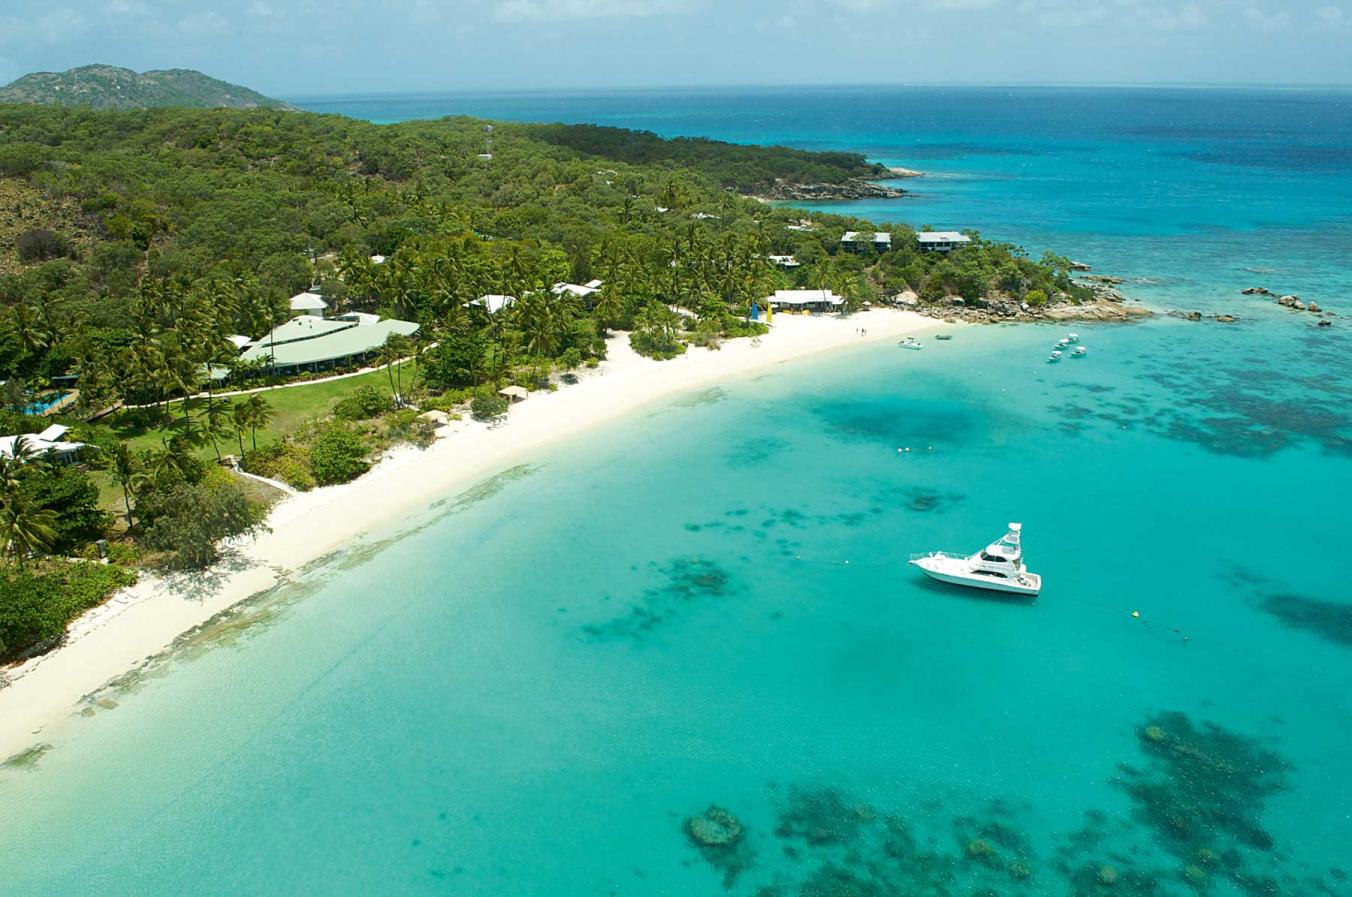 Lizard Island resort in the Great Barrier Reef, is the only development on the island, accessible exclusively by plane and filling only 40 rooms at a time (photo by National Geographic Travel).